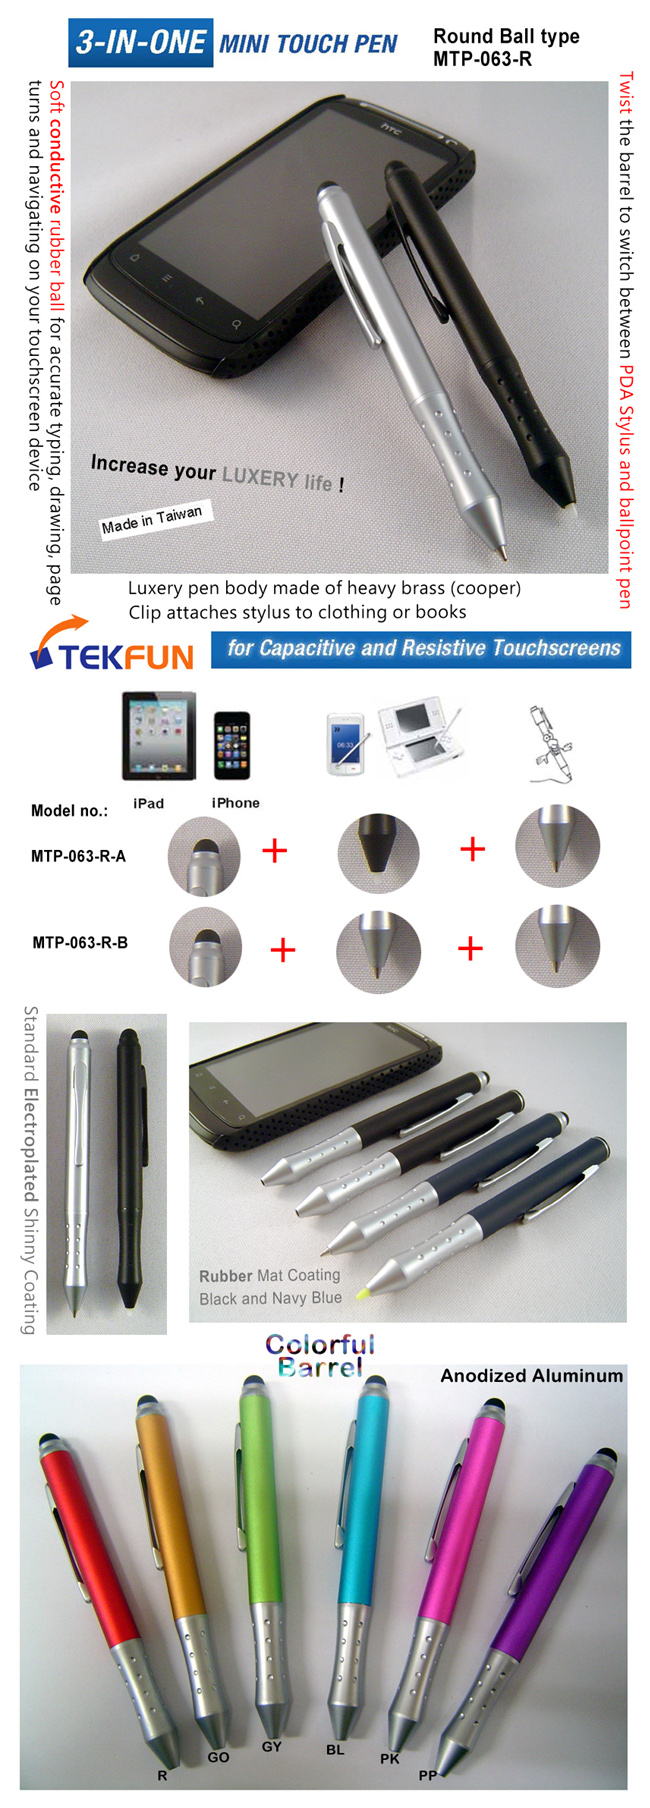 MTP-063-R: 3-in-1 luxery metal touch stylus and pen works for Apple iPad/iPhone/any capacitive touchscreen; PDA/GPS/NDS/any resistive touch screen and ballpoint pen; round ball capacitive stylus